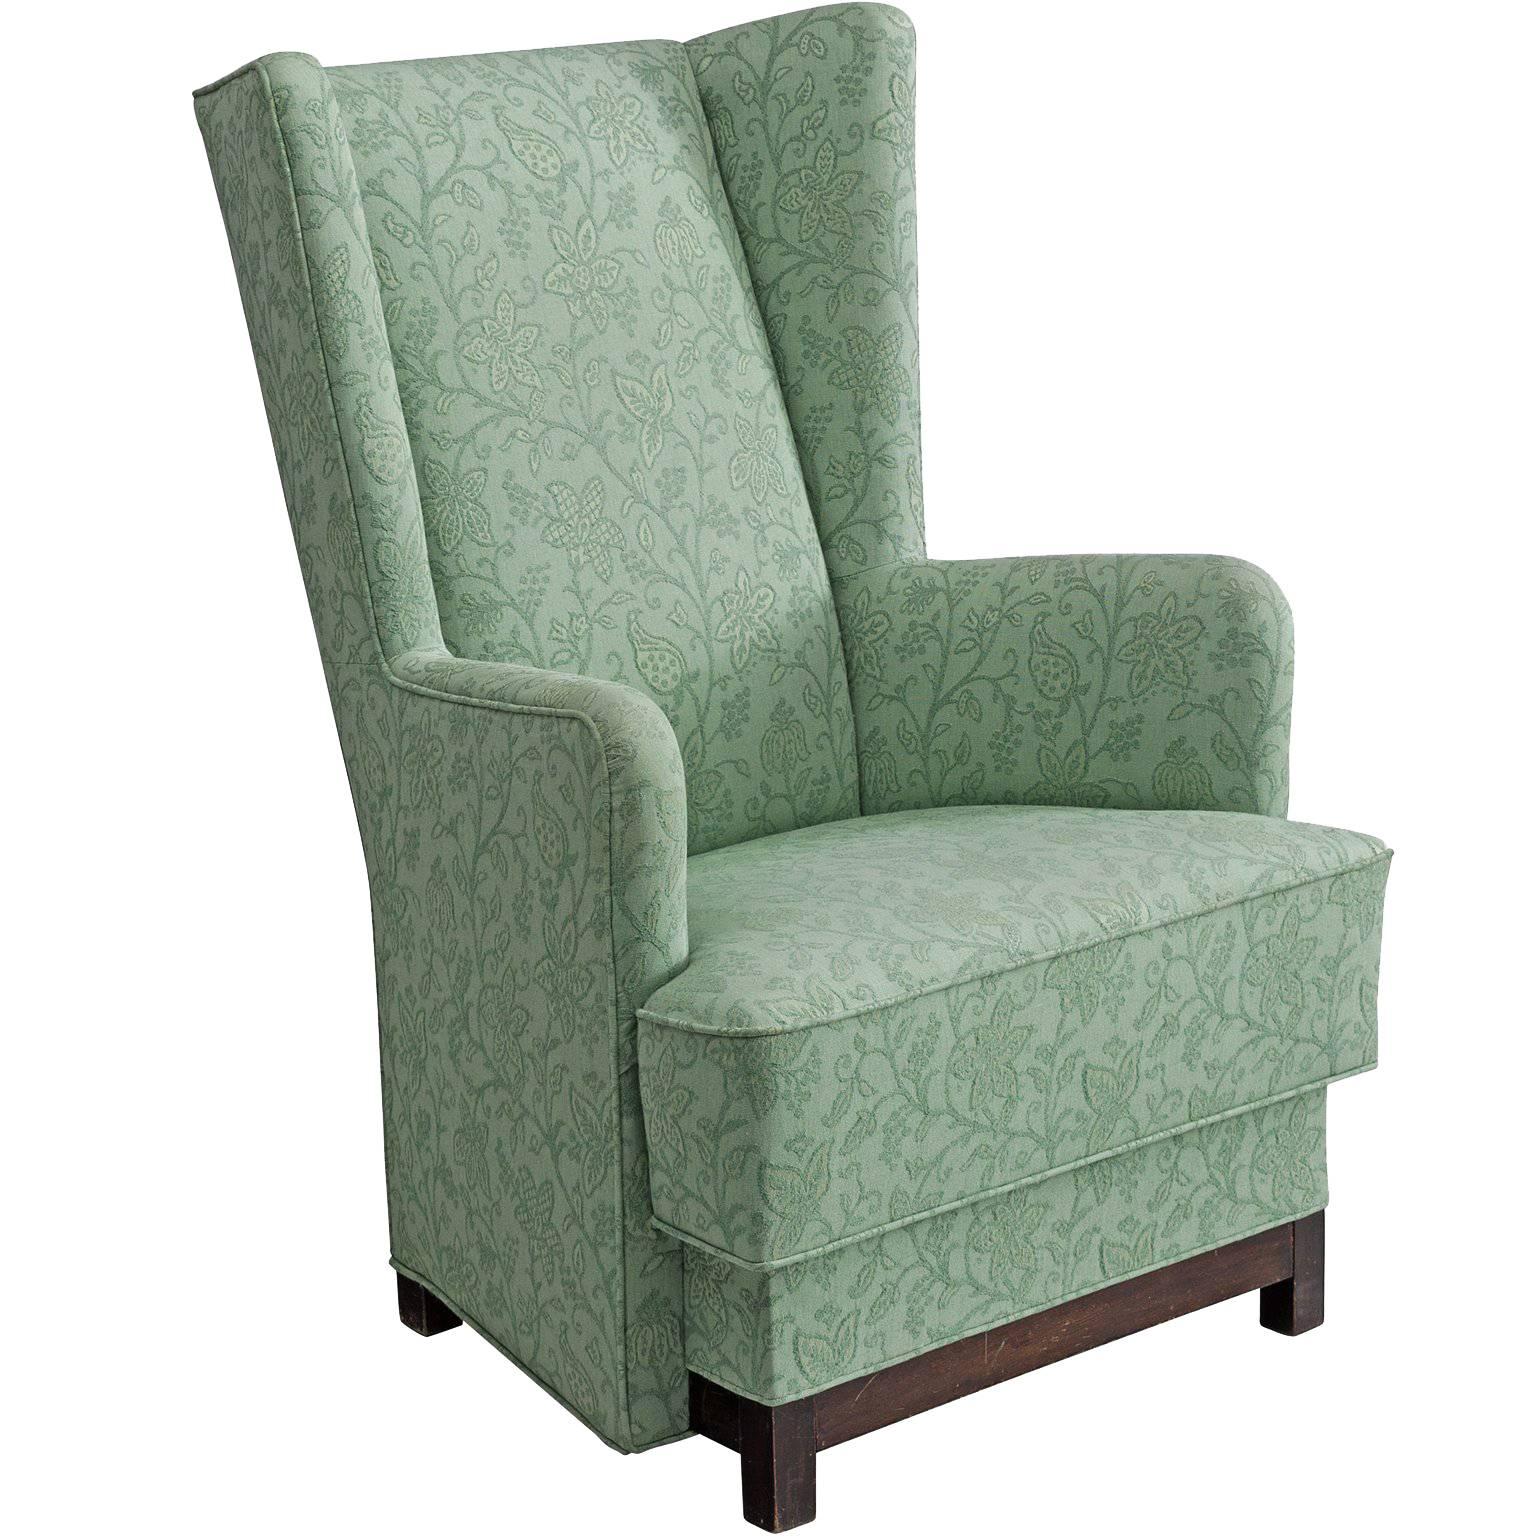 Danish Wing Back Chair in Green Floral Upholstery, 1940s